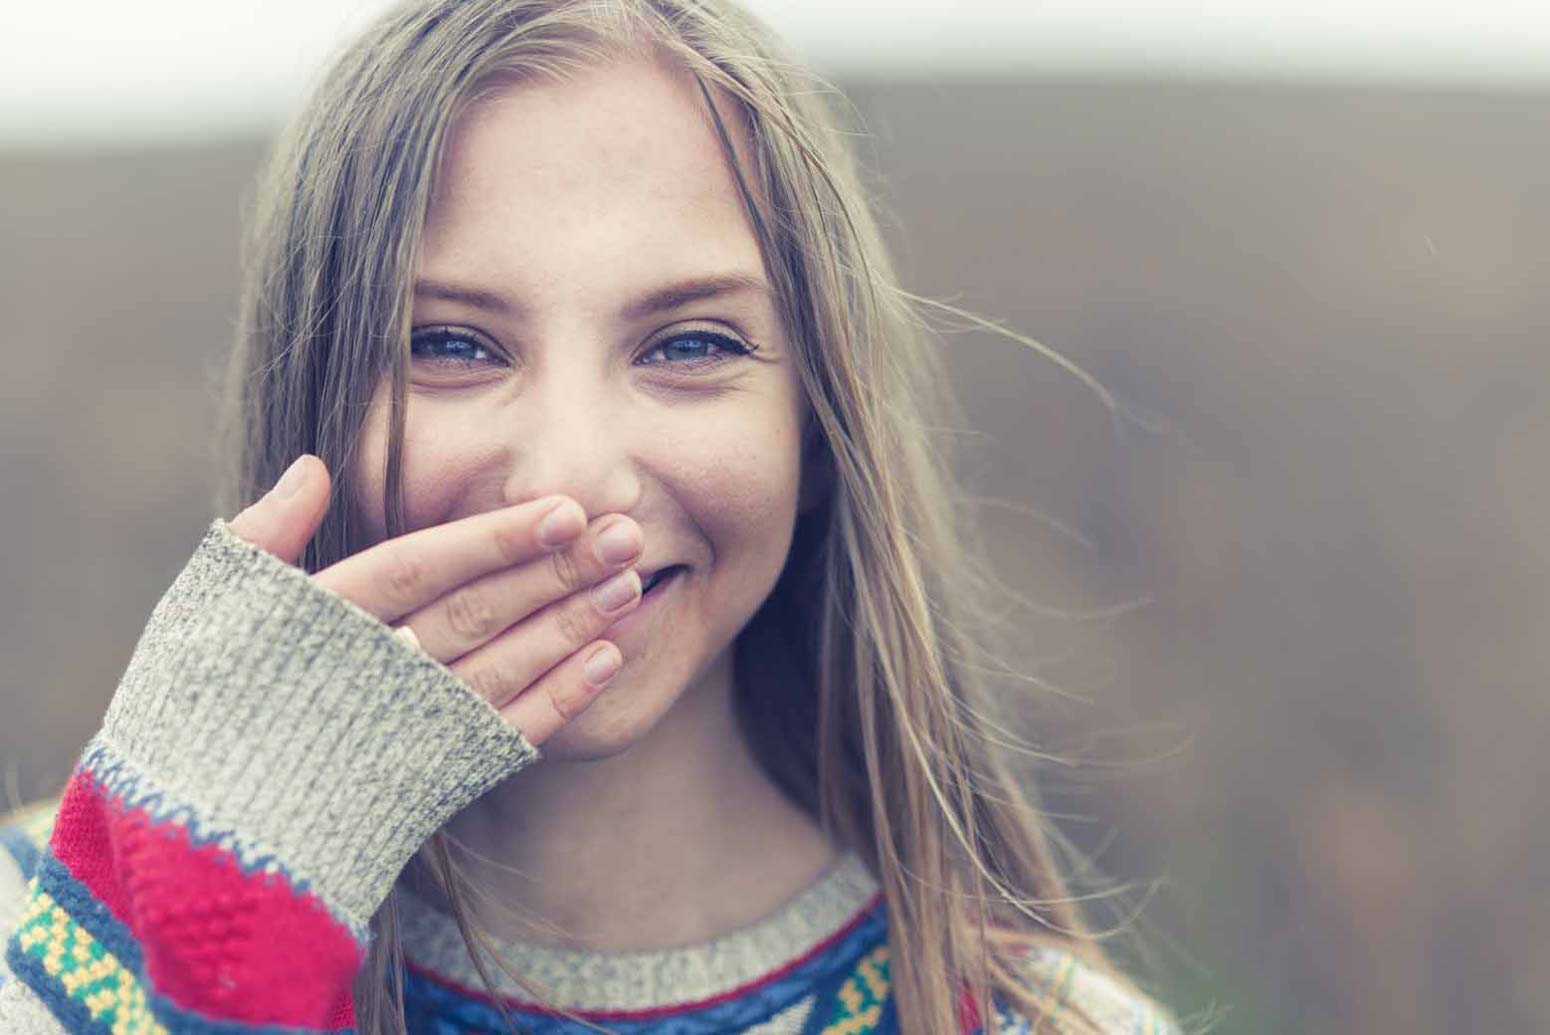 young girl smiling with hand covering her mouth